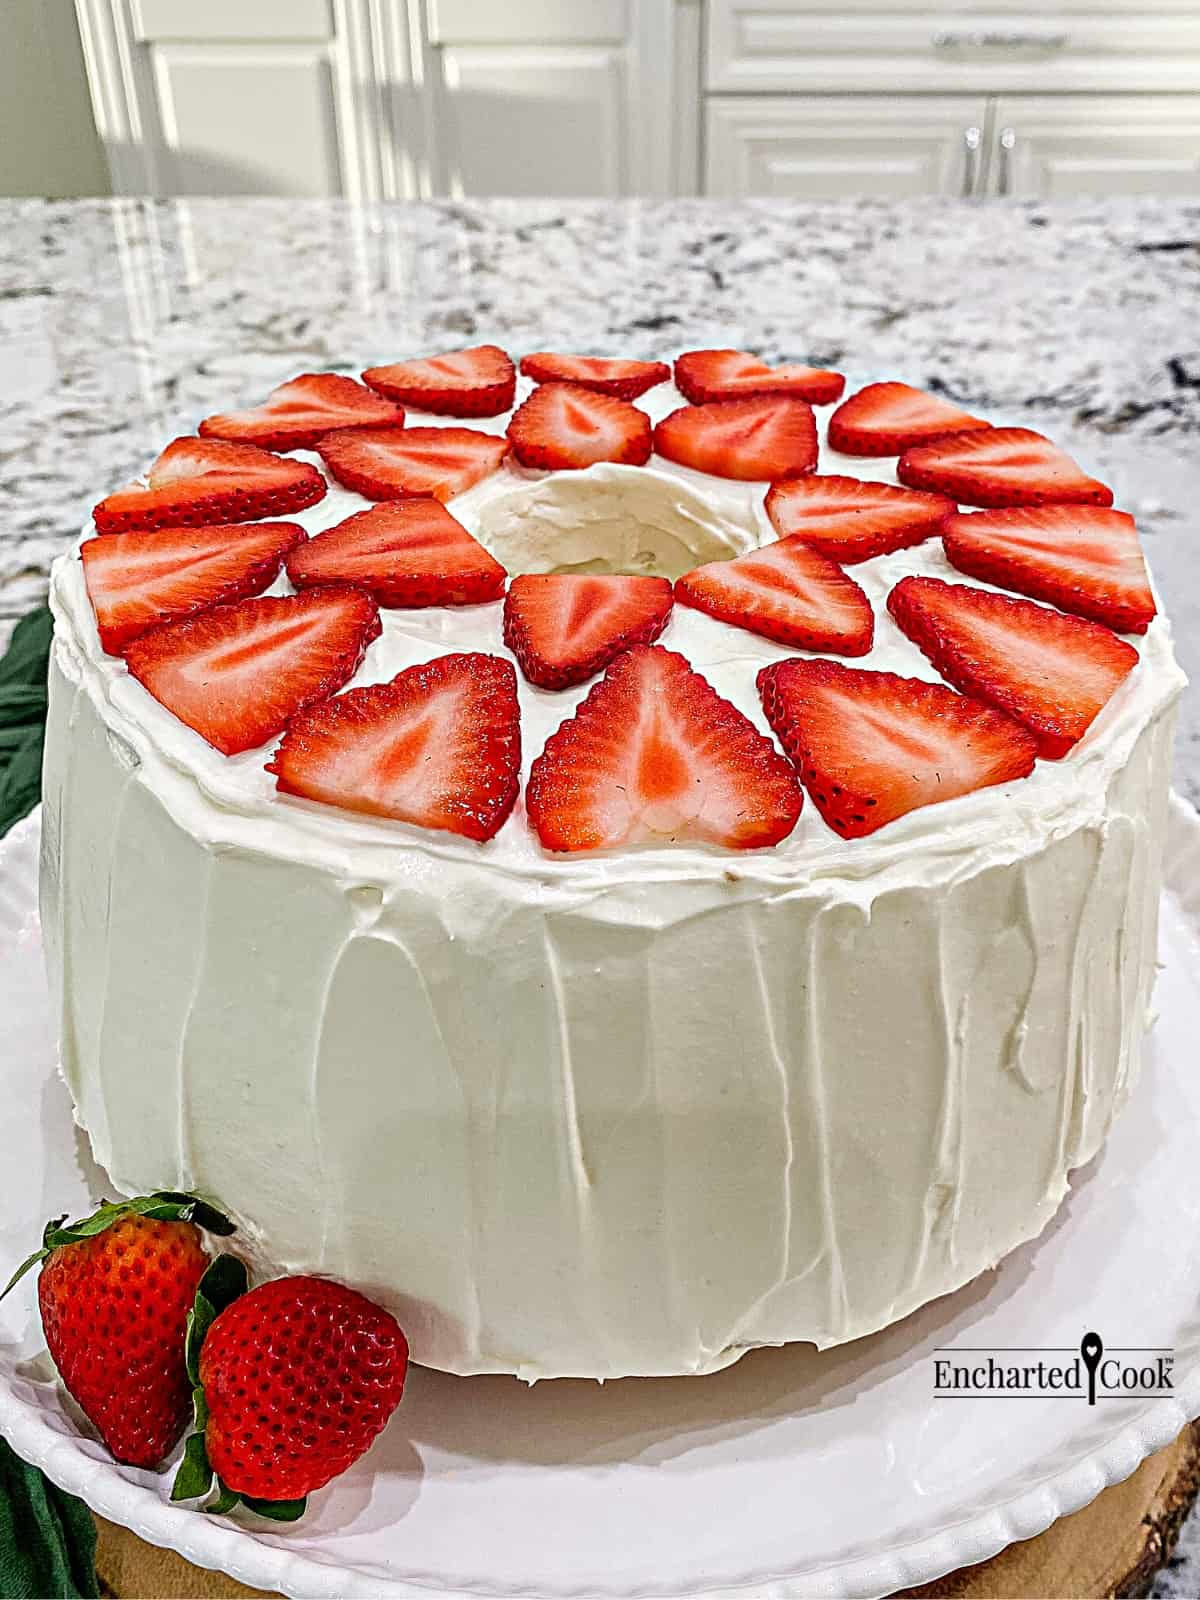 A tube cake in white frosting decorated with sliced strawberries on its top.